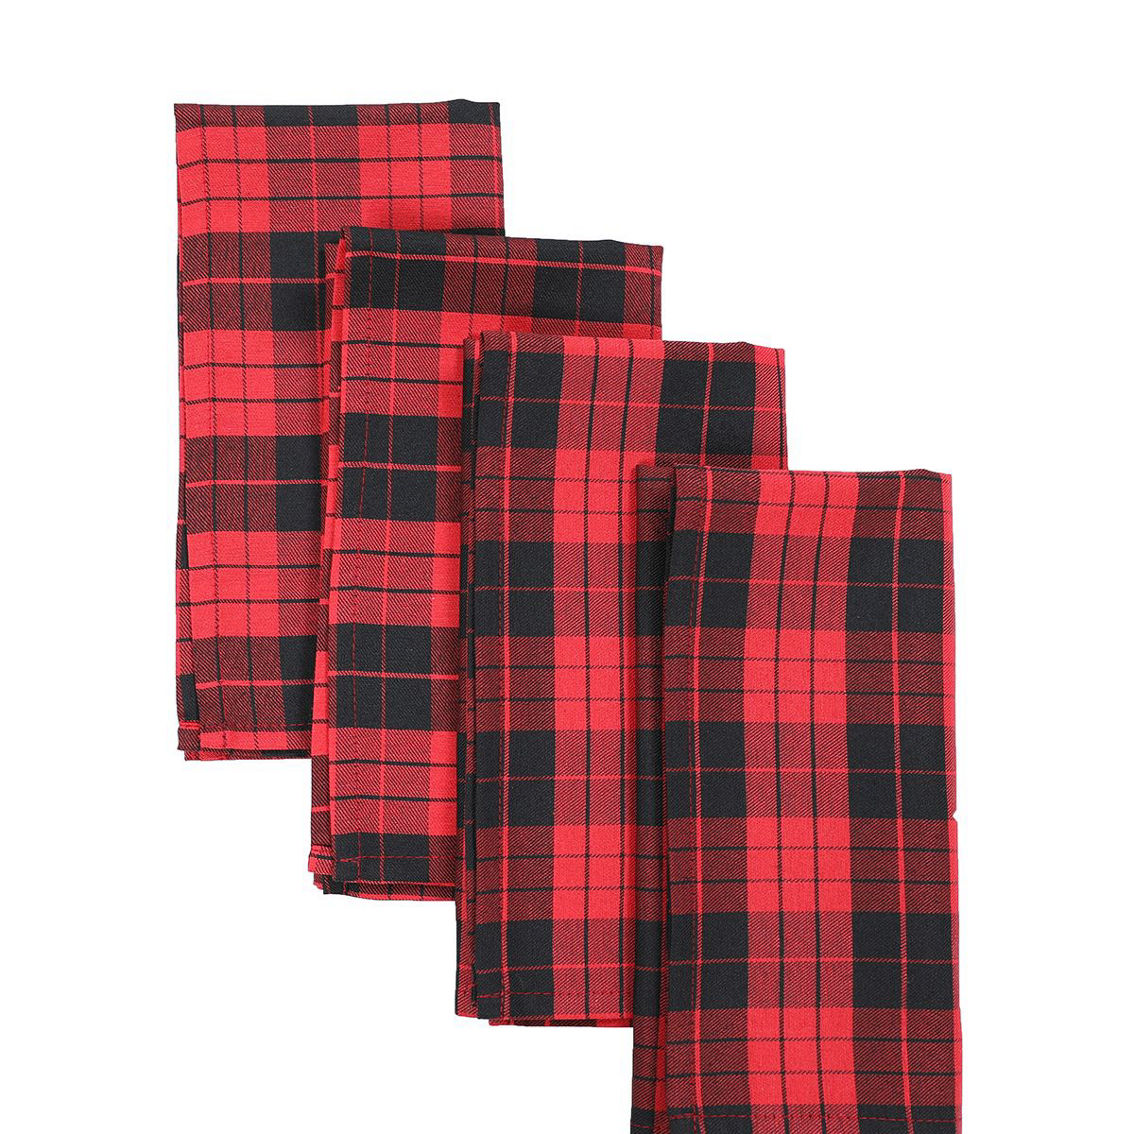 Manor Luxe Holiday Plaid Napkins 20 by 20-Inch, Set of 4 - Image 2 of 2